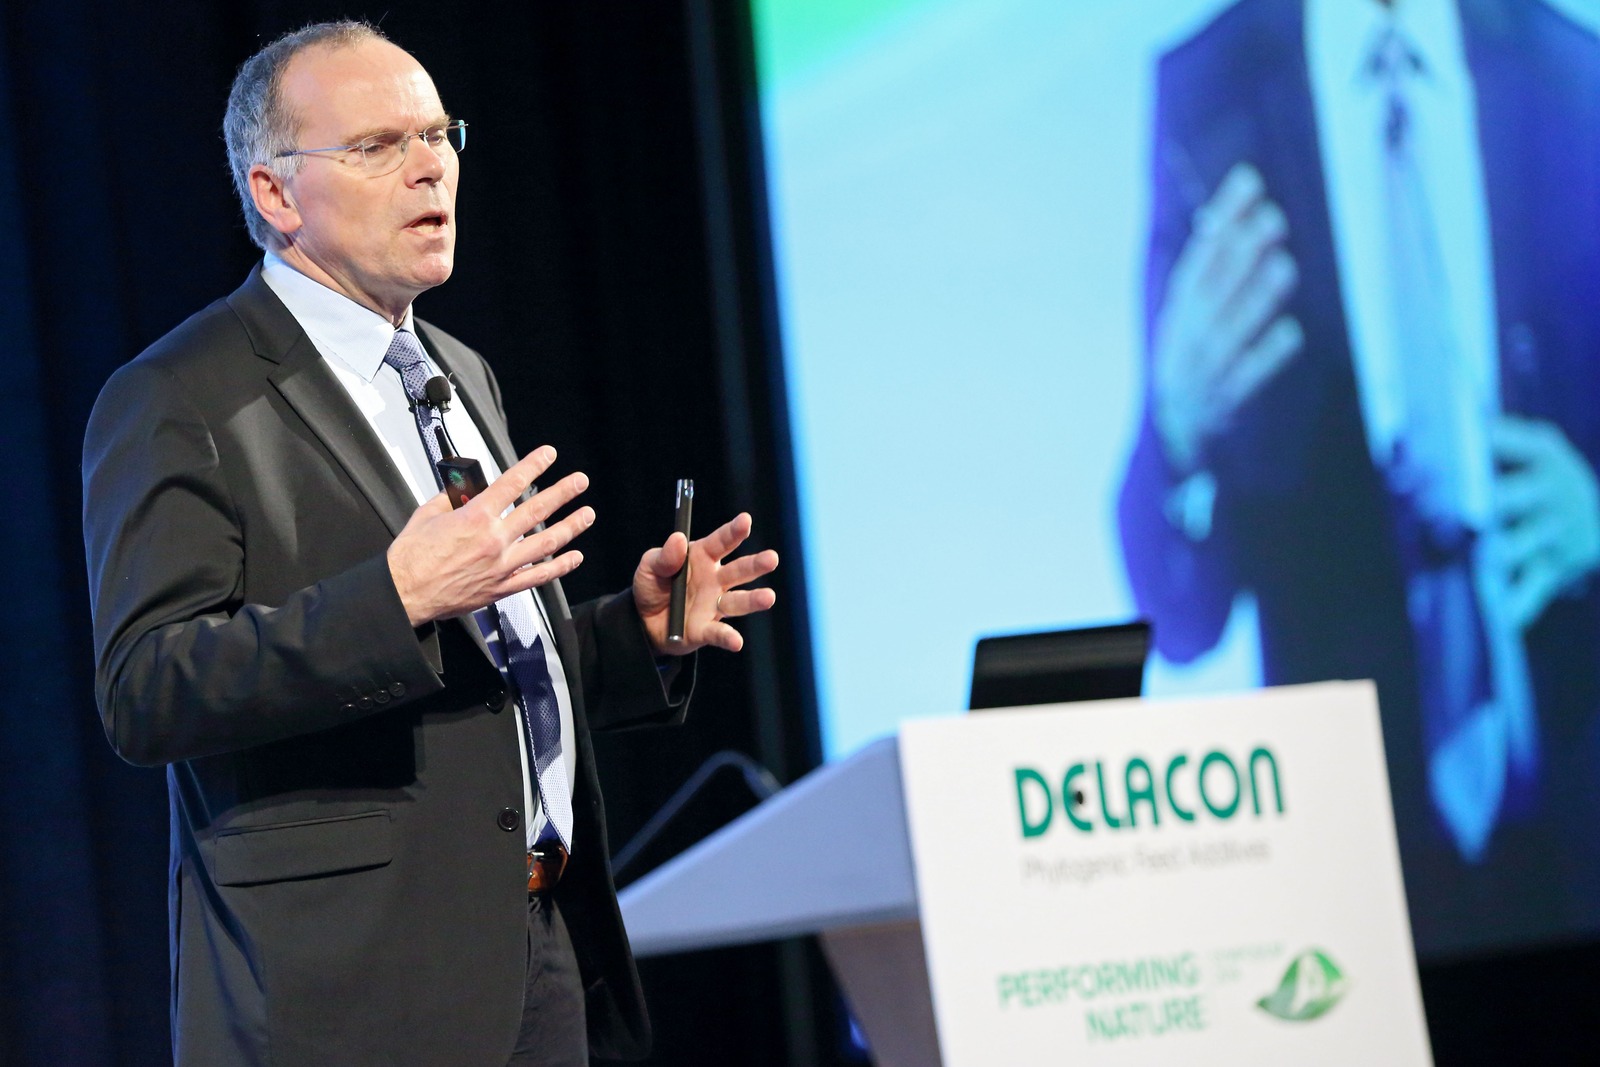 Delacon conference: ‘Is cultured meat the future?’